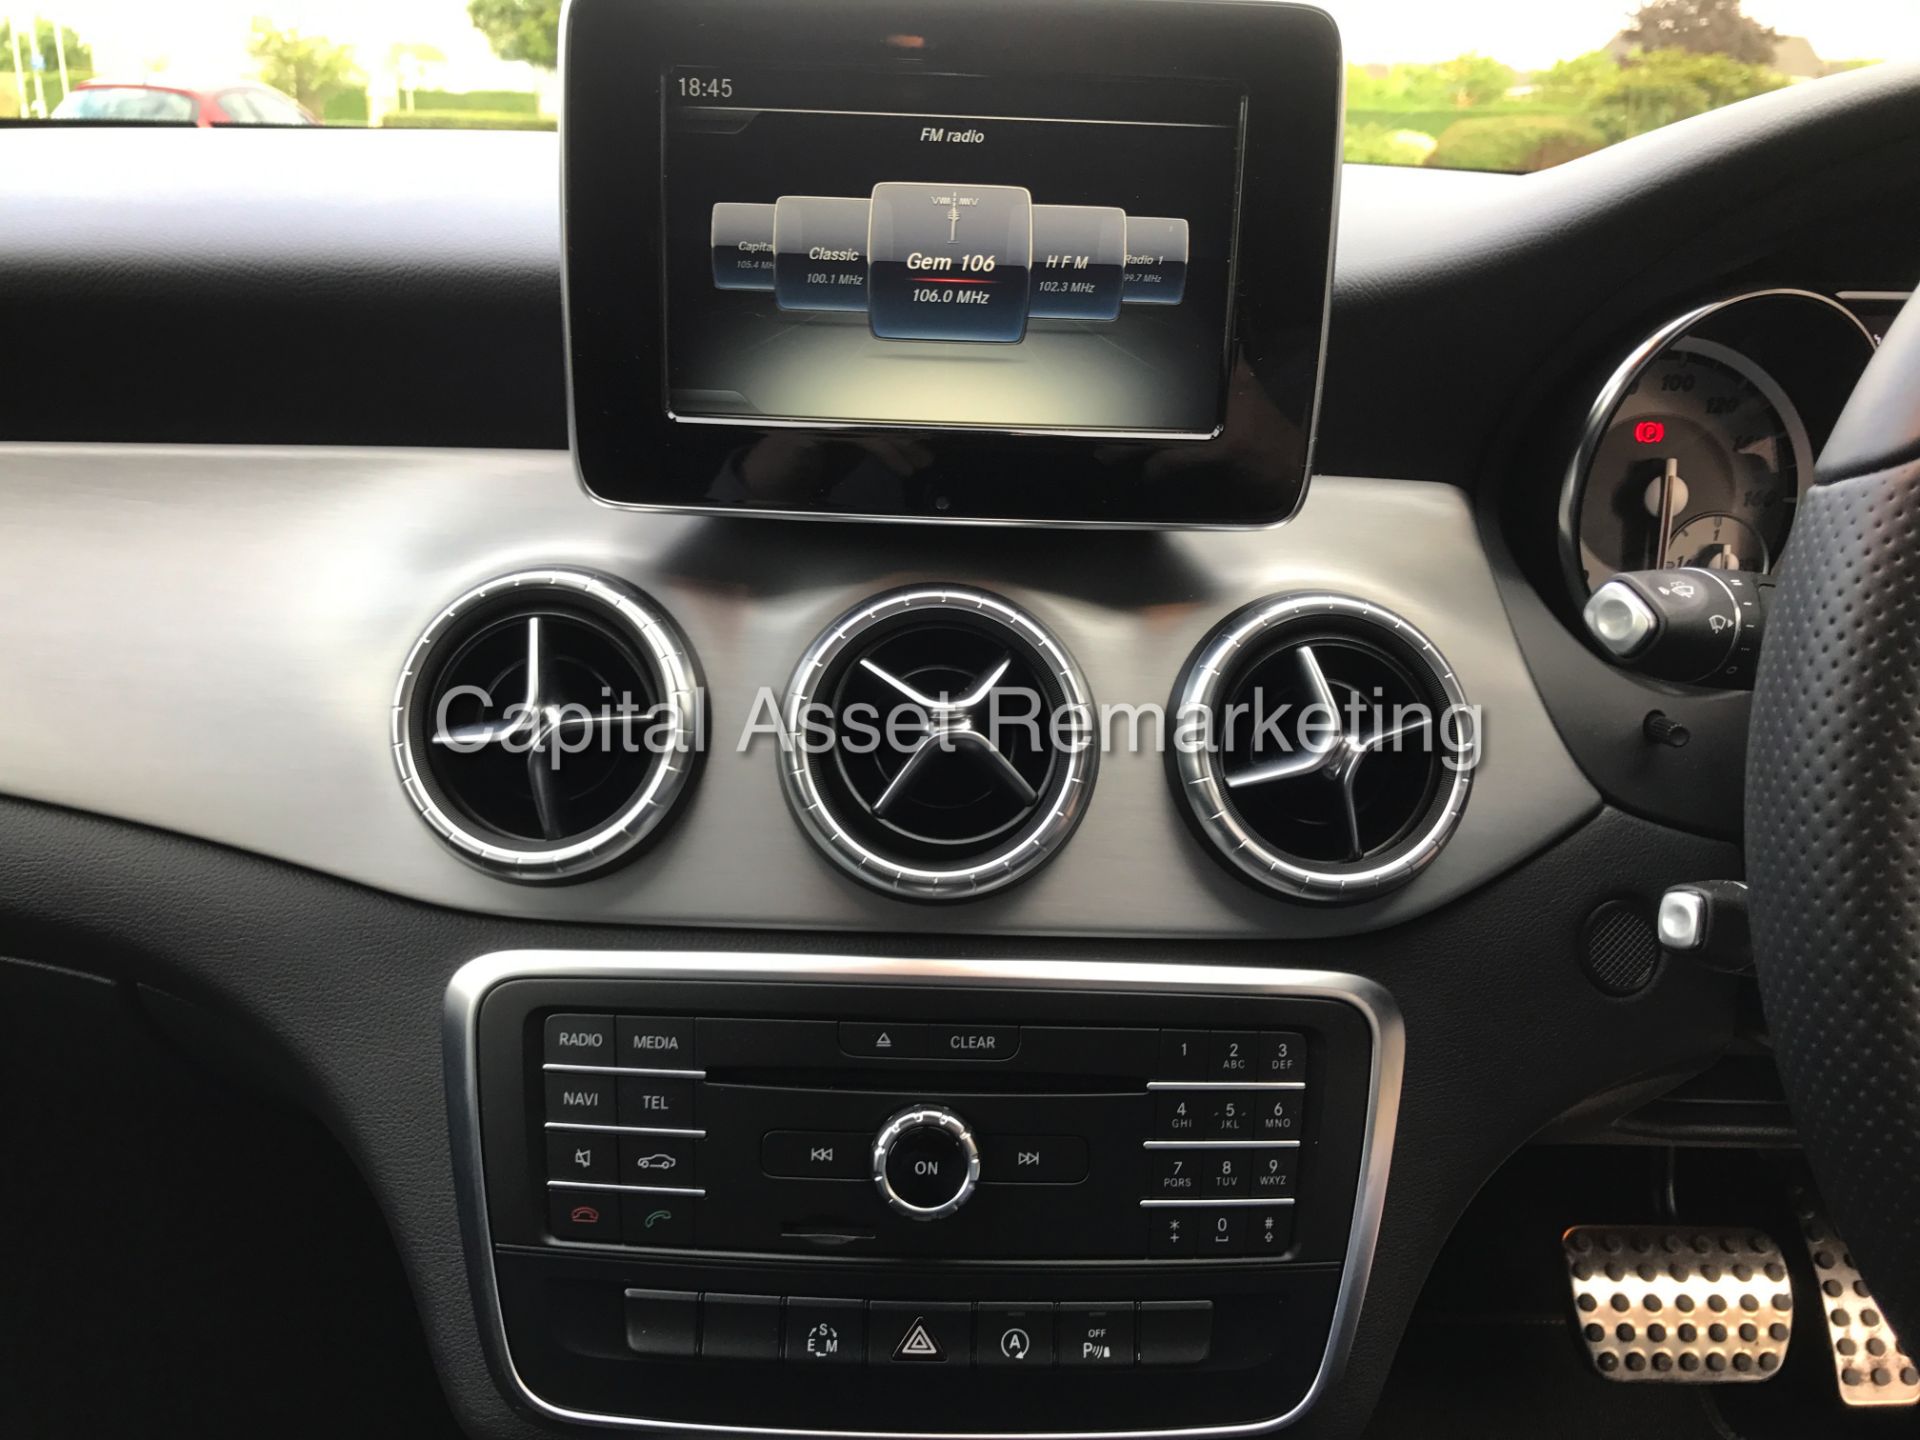 MERCEDES-BENZ CLA 220d 'AMG - NIGHT EDITION' (2015) '7-G AUTO - LEATHER - SAT NAV' *HUGE SPEC* - Image 18 of 24